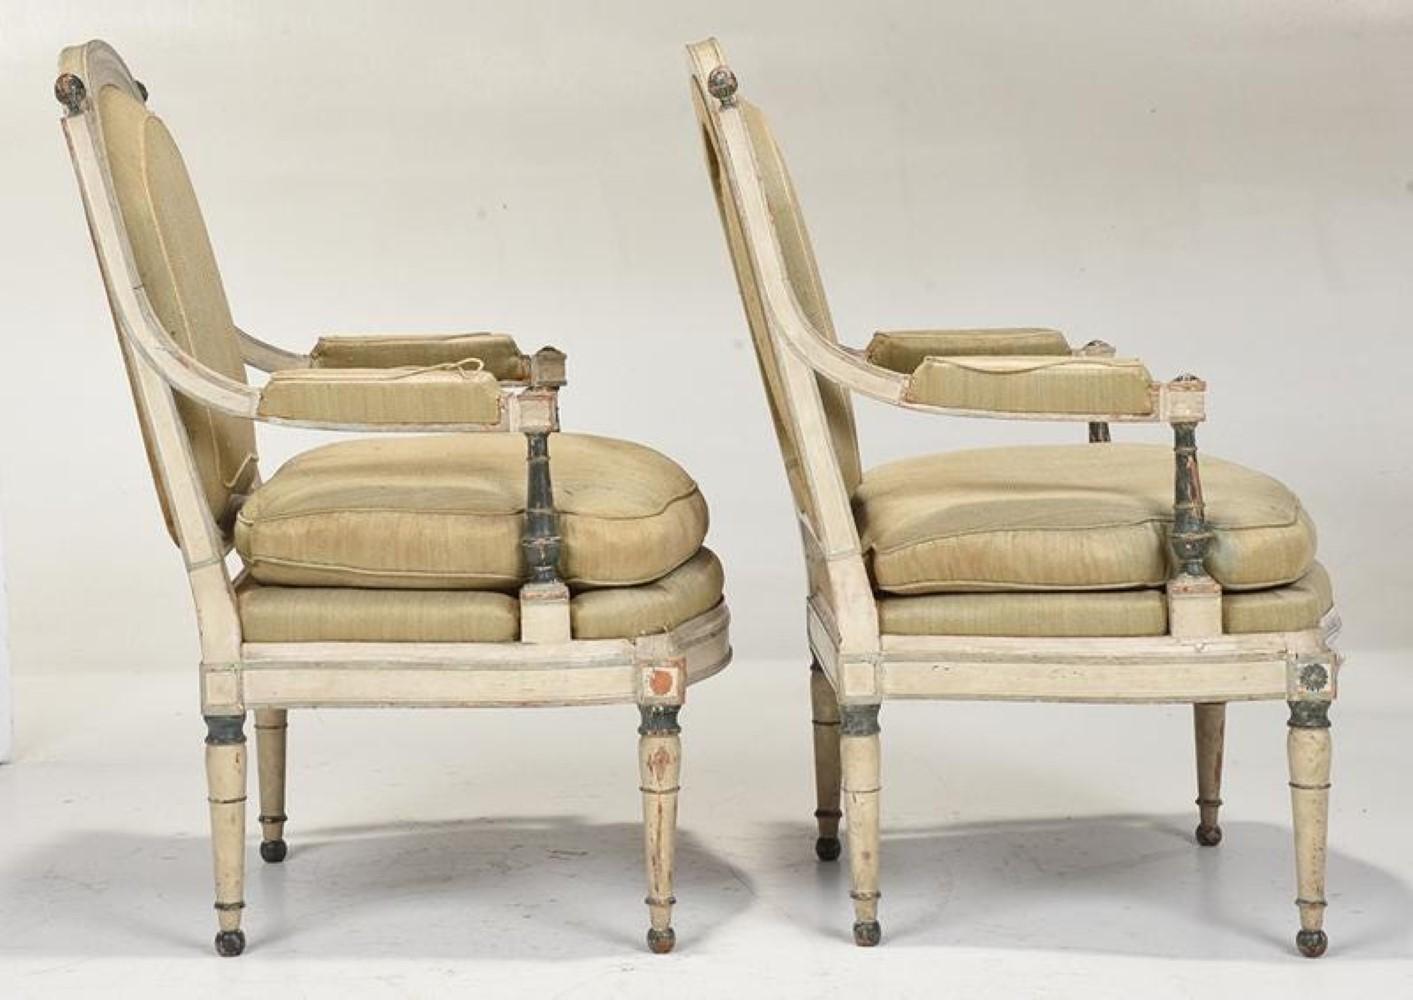 Painted “Georges Jacob”, Signed Pair Of Directoire Fauteuils, C. 1790